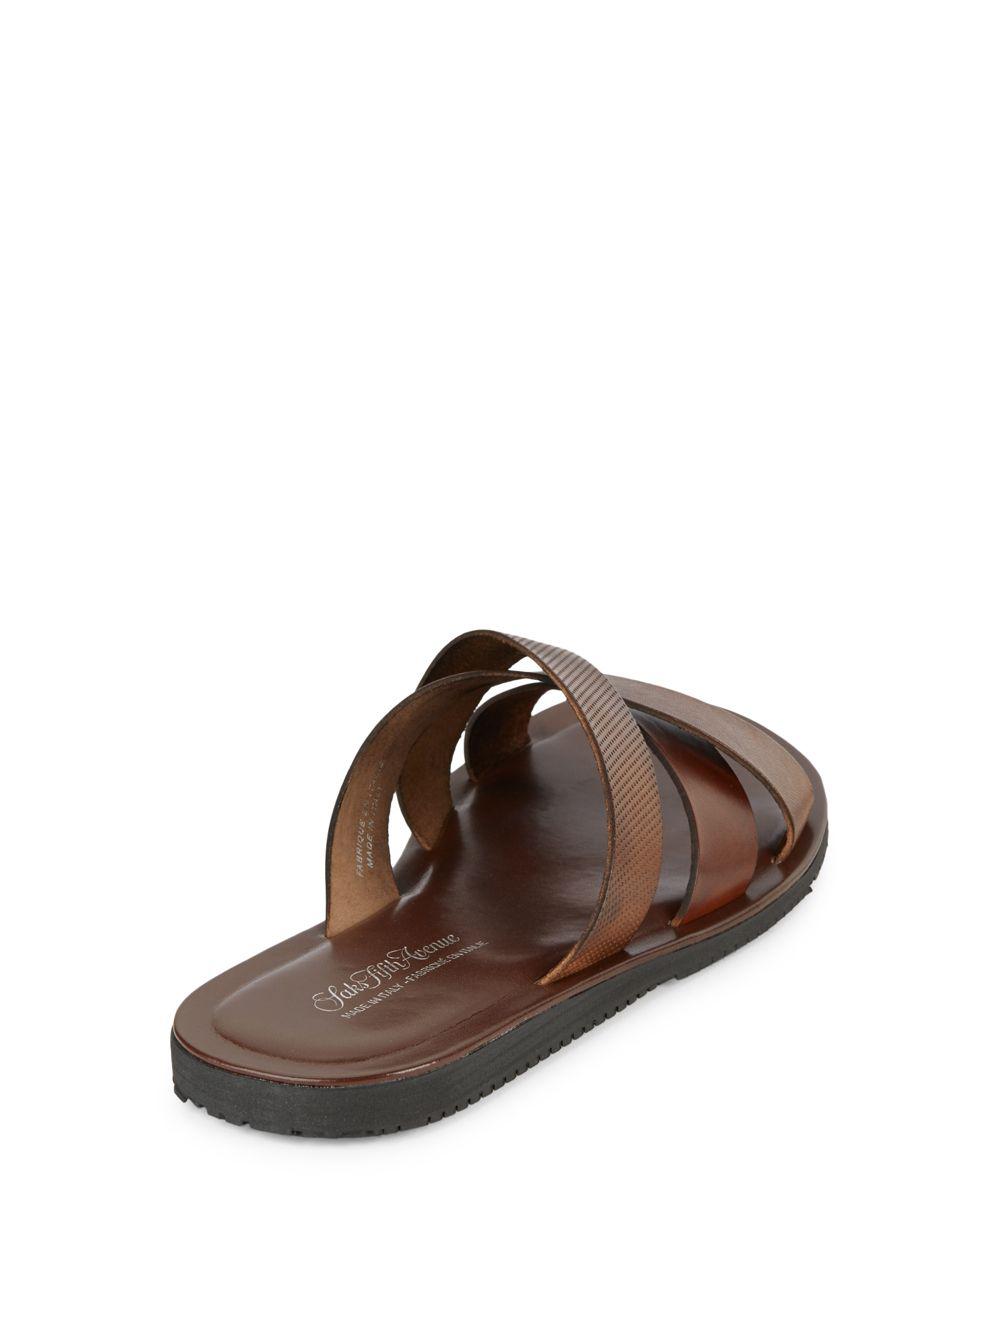 Saks Italian Leather Sandals Brown for | Lyst